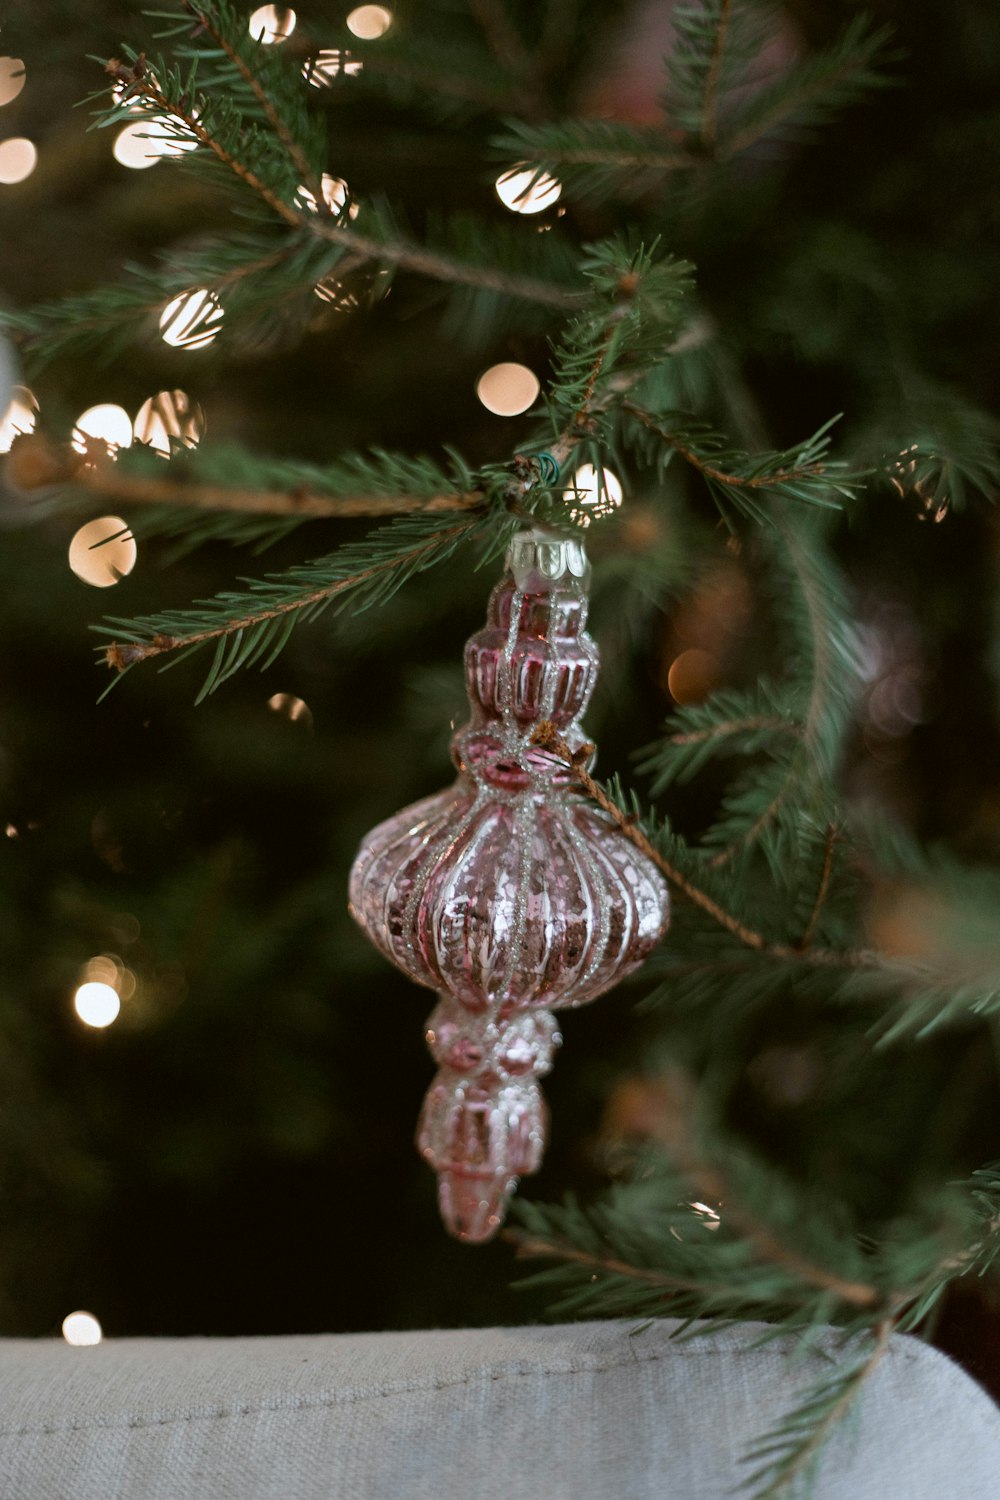 a glass ornament hanging from a christmas tree